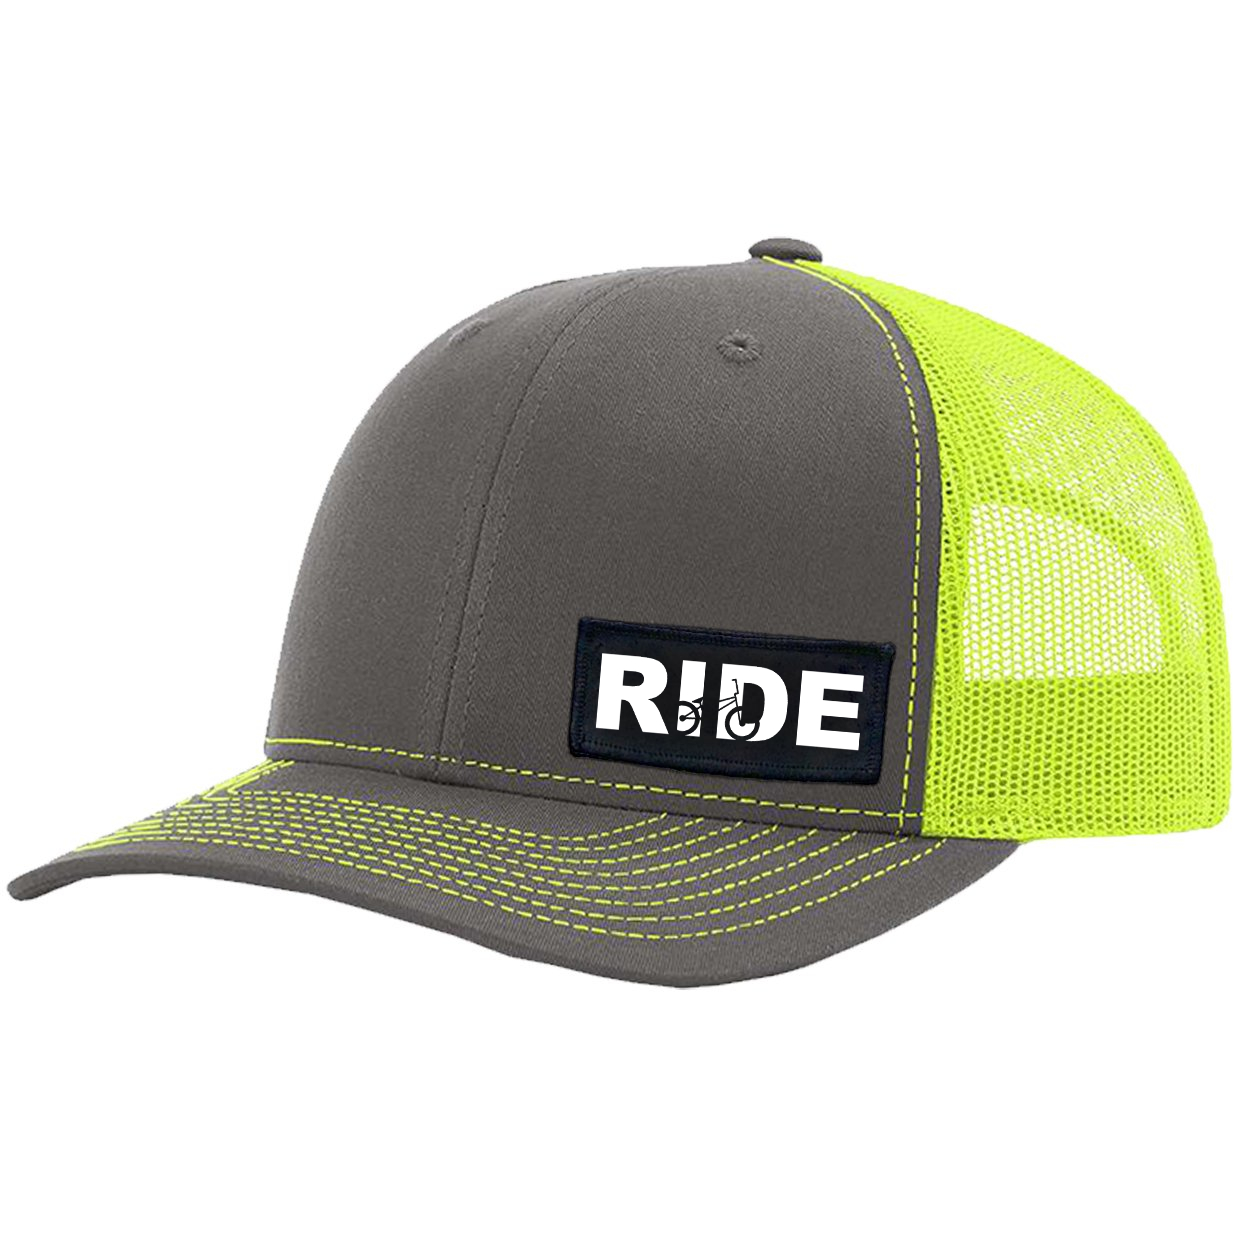 Ride BMX Logo Night Out Woven Patch Snapback Trucker Hat Charcoal/Neon Yellow (White Logo)